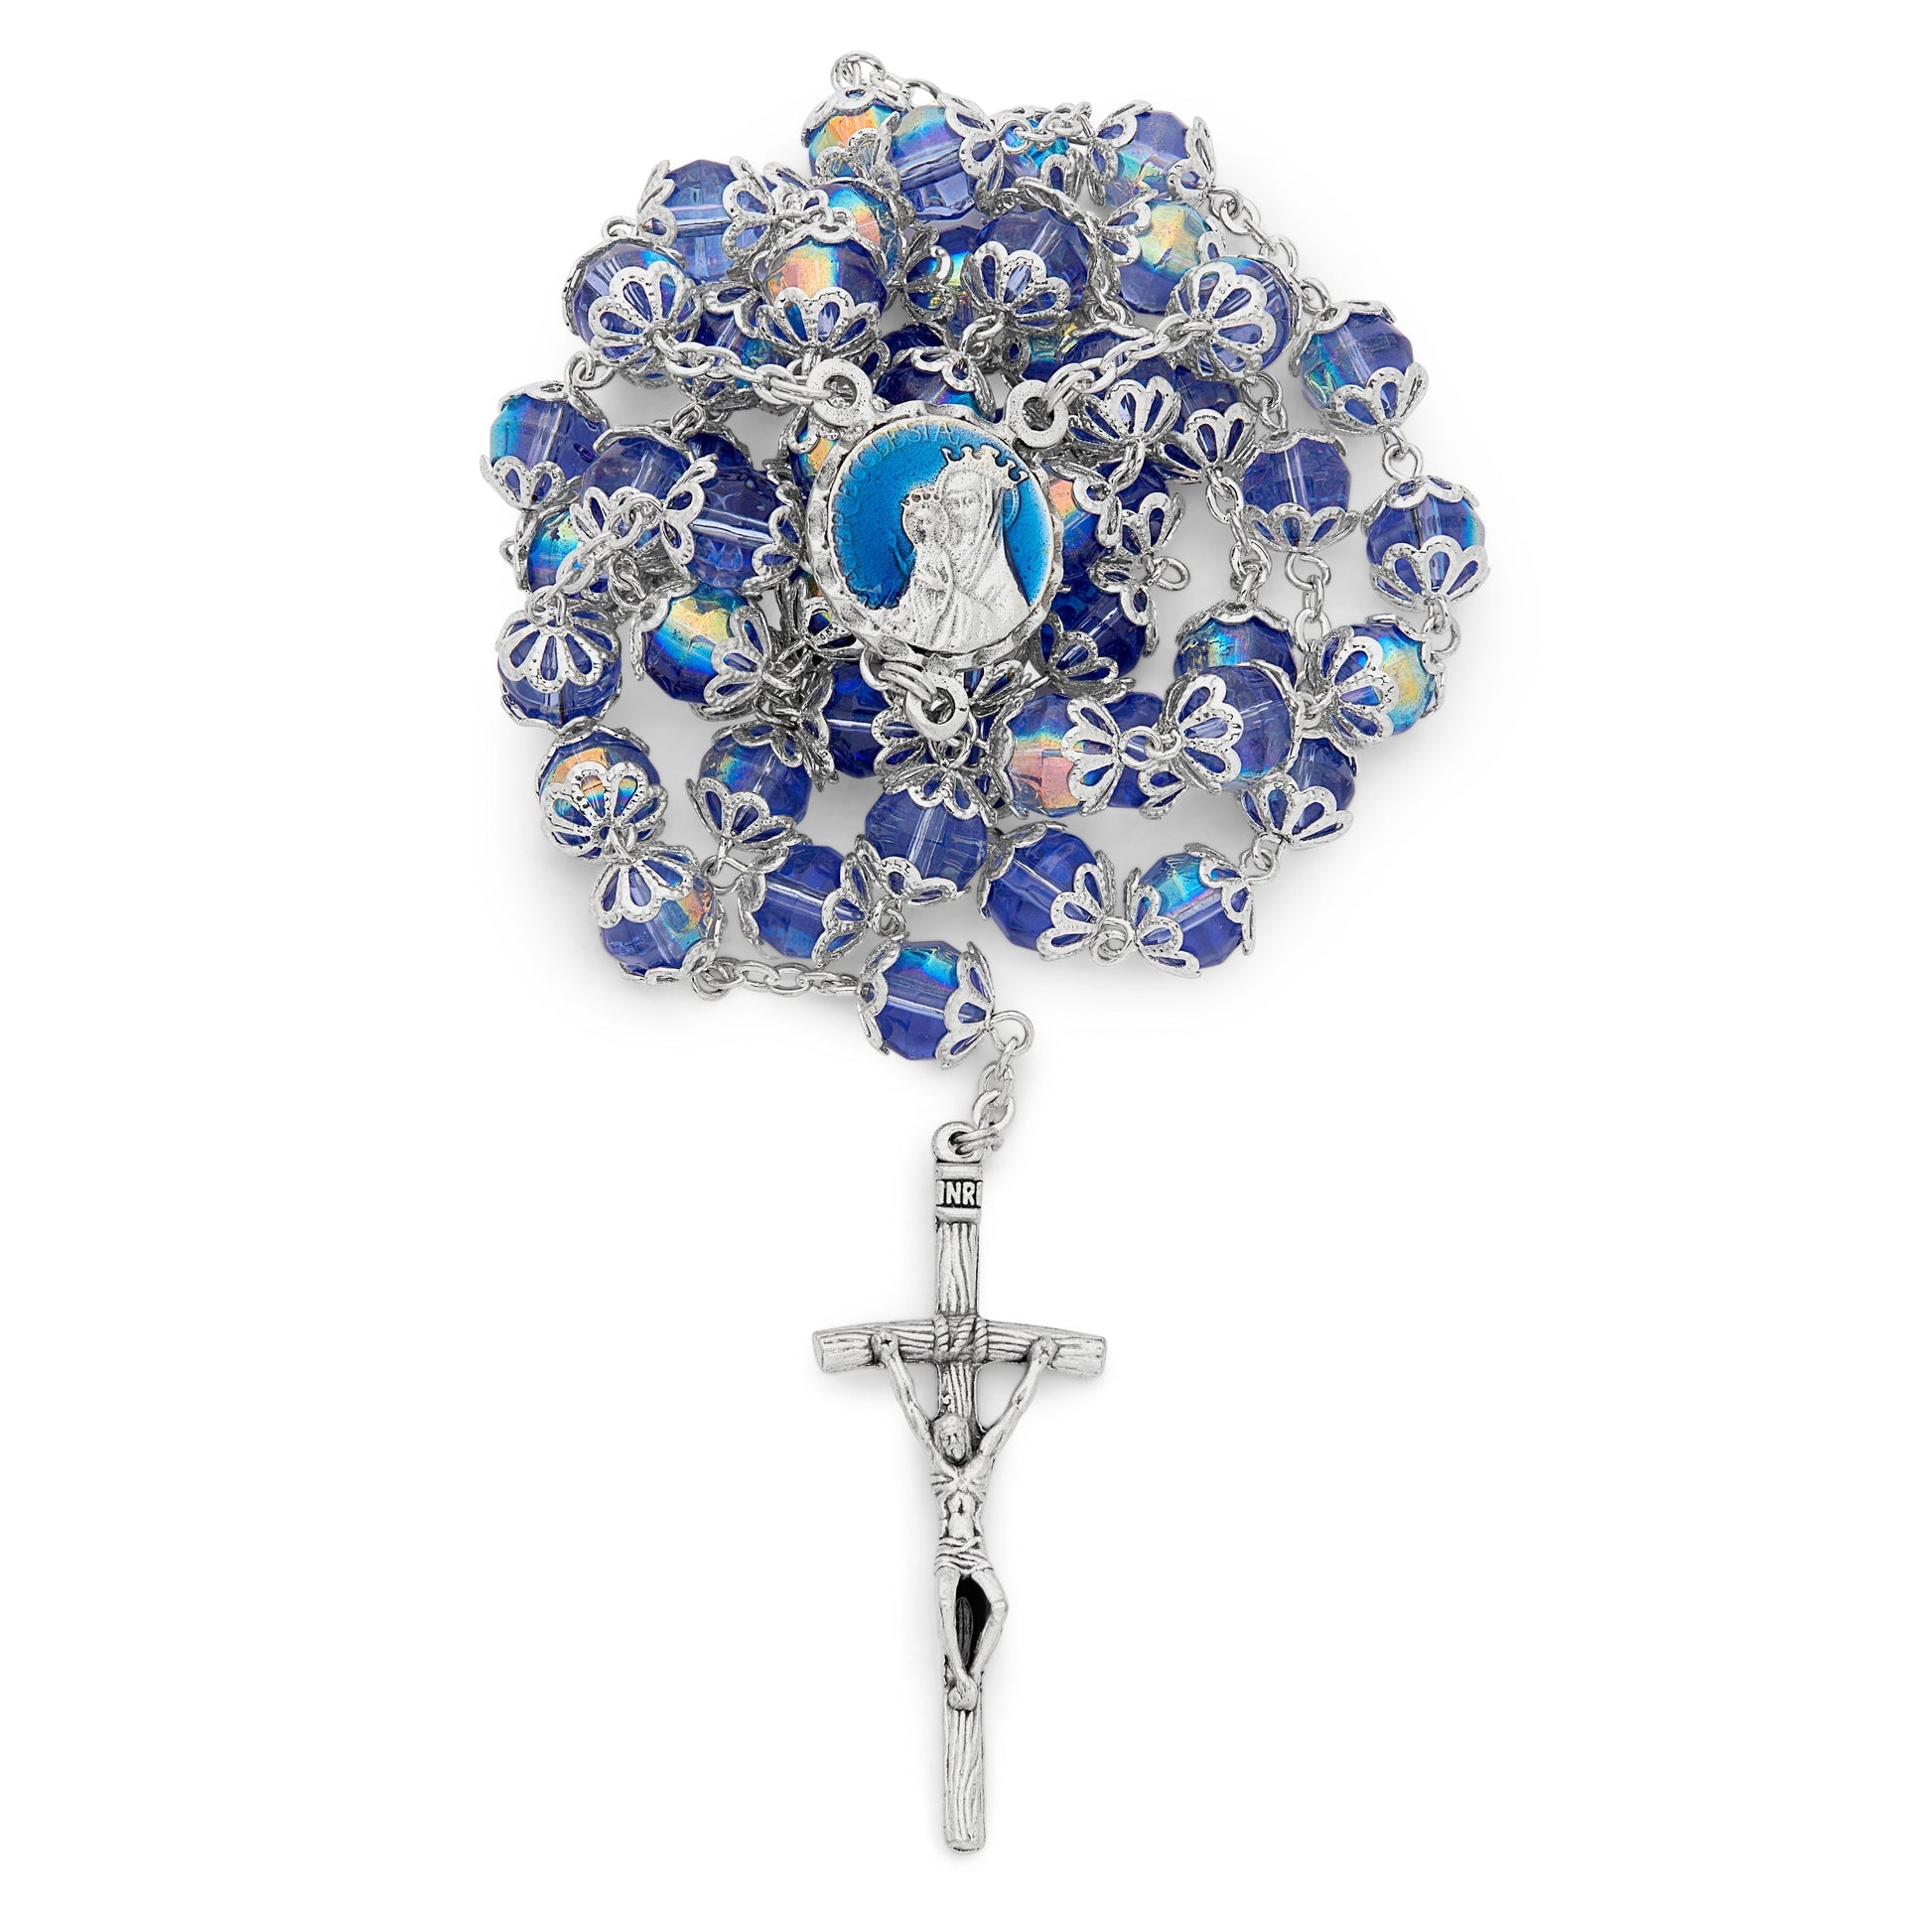 MONDO CATTOLICO Prayer Beads Mater Ecclesiae Rosary in Decorated Caps Blue Beads